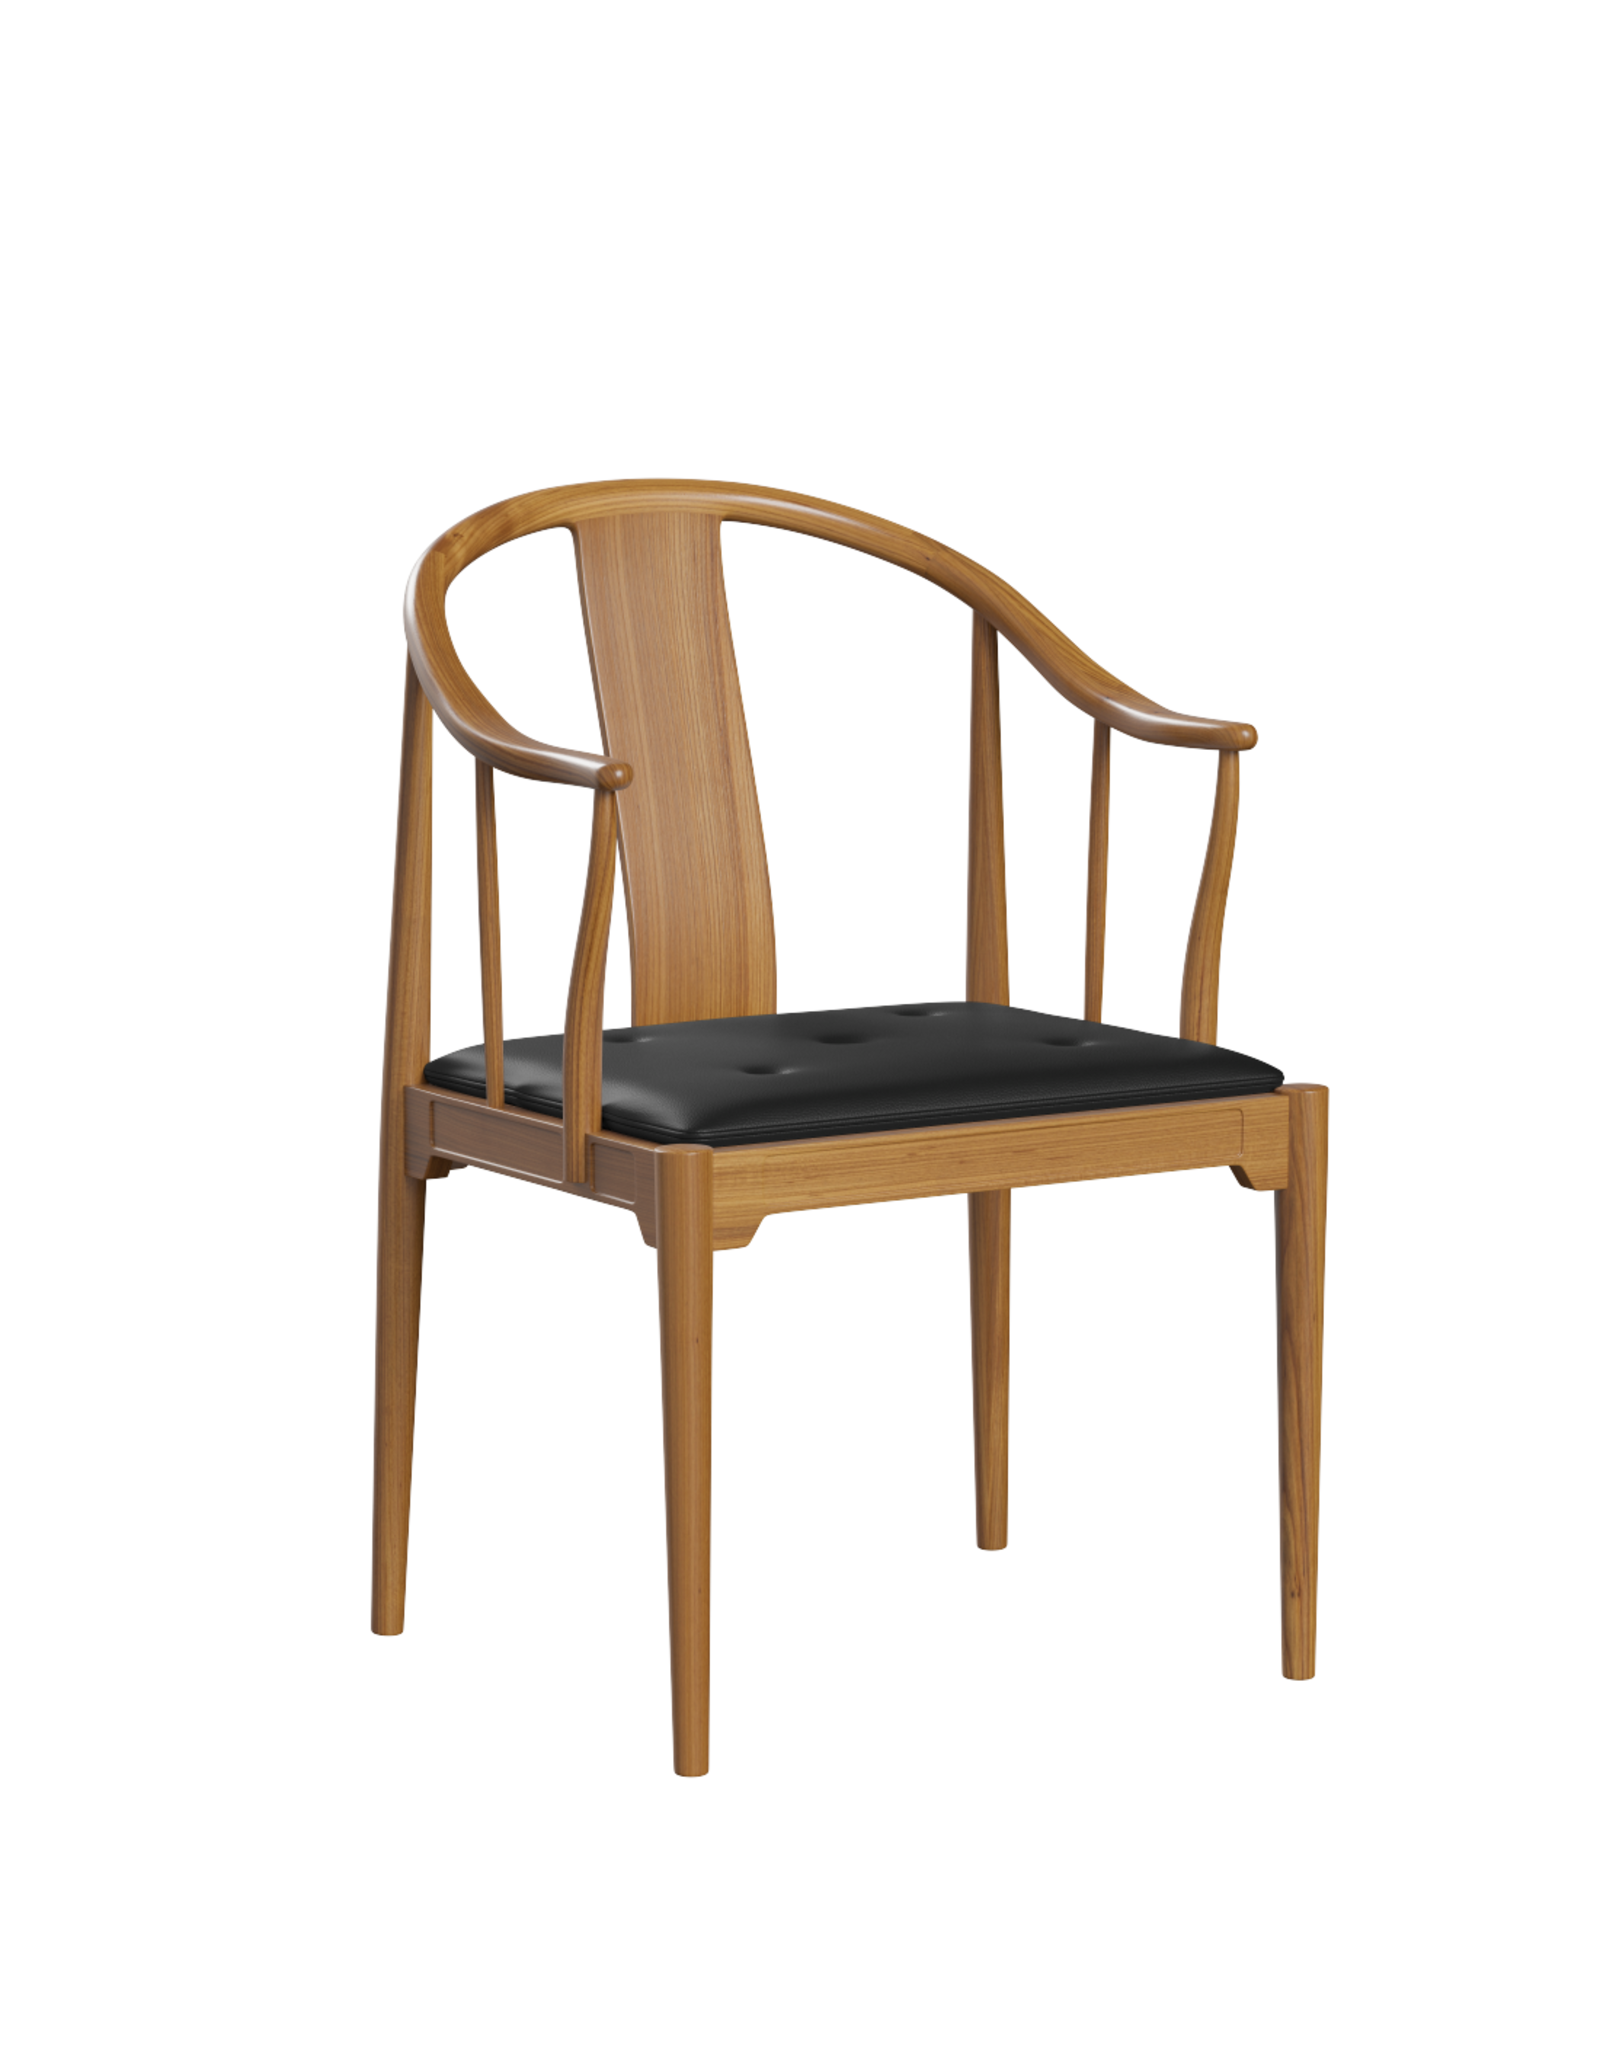 CHINA CHAIR IN CHERRY